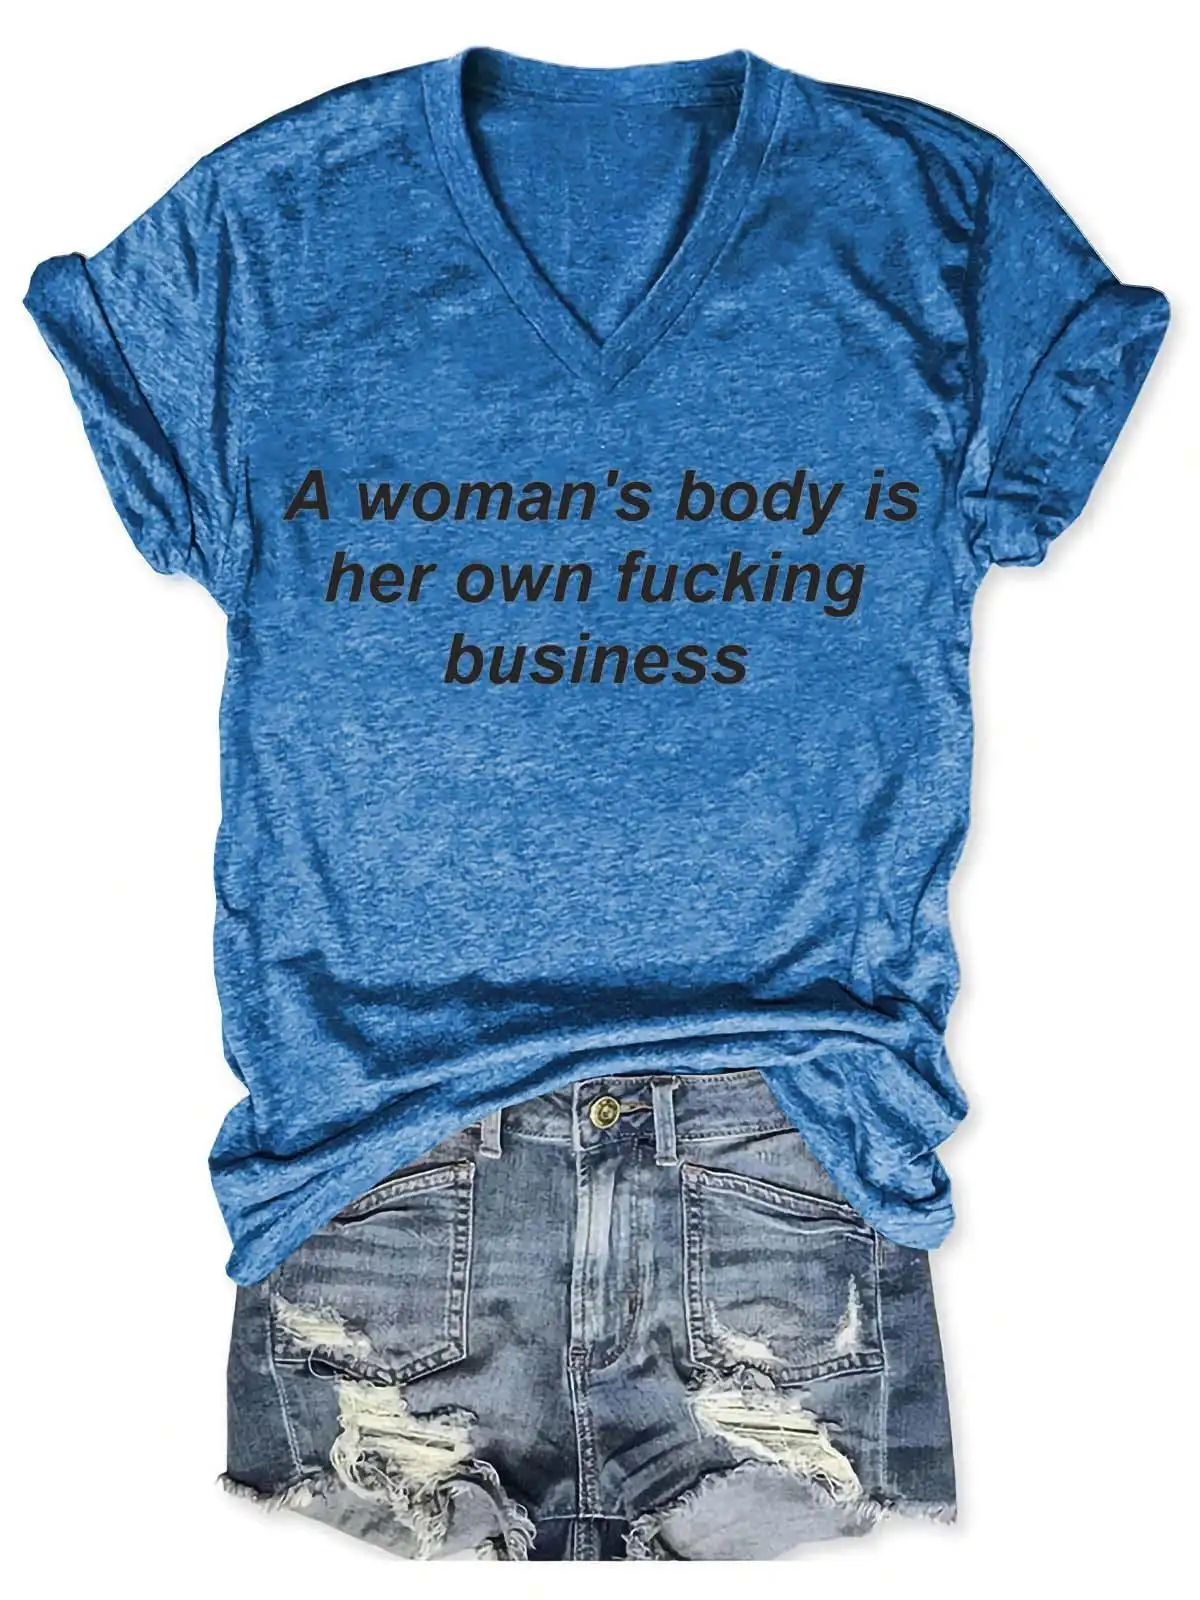 Lovessales Womens A Womans Body Is Her Own F Business V-Neck Short Sleeve 100% Cotton T-shirt